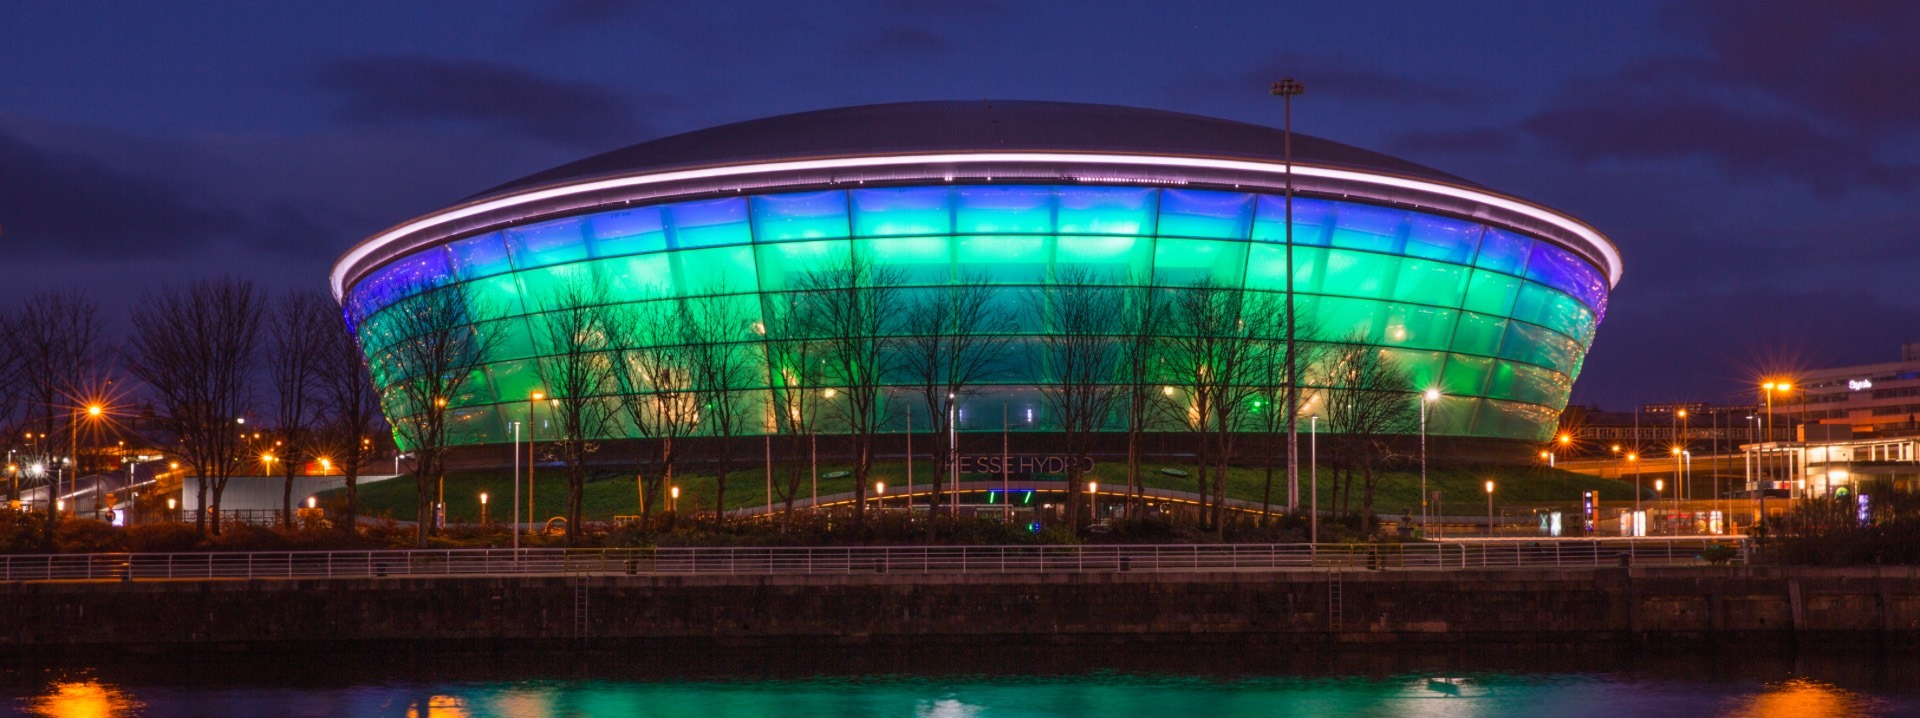 SSE Hydro arena illuminated at night on the site of The Scottish Exhibition and Conference Centre, Glasgow